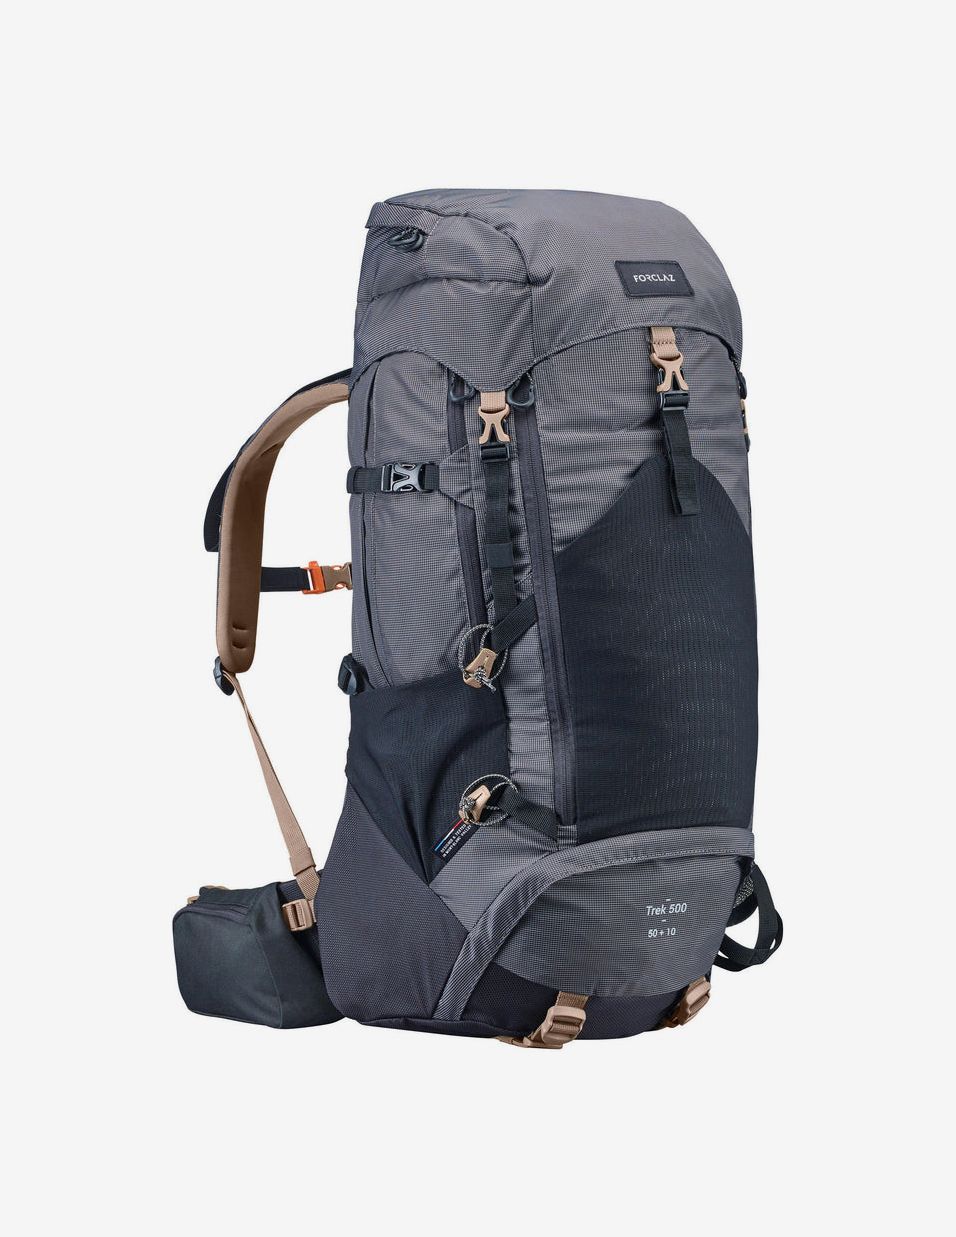 Best Travel Backpacks, Carry-on Backpacks Frequent Travelers | The